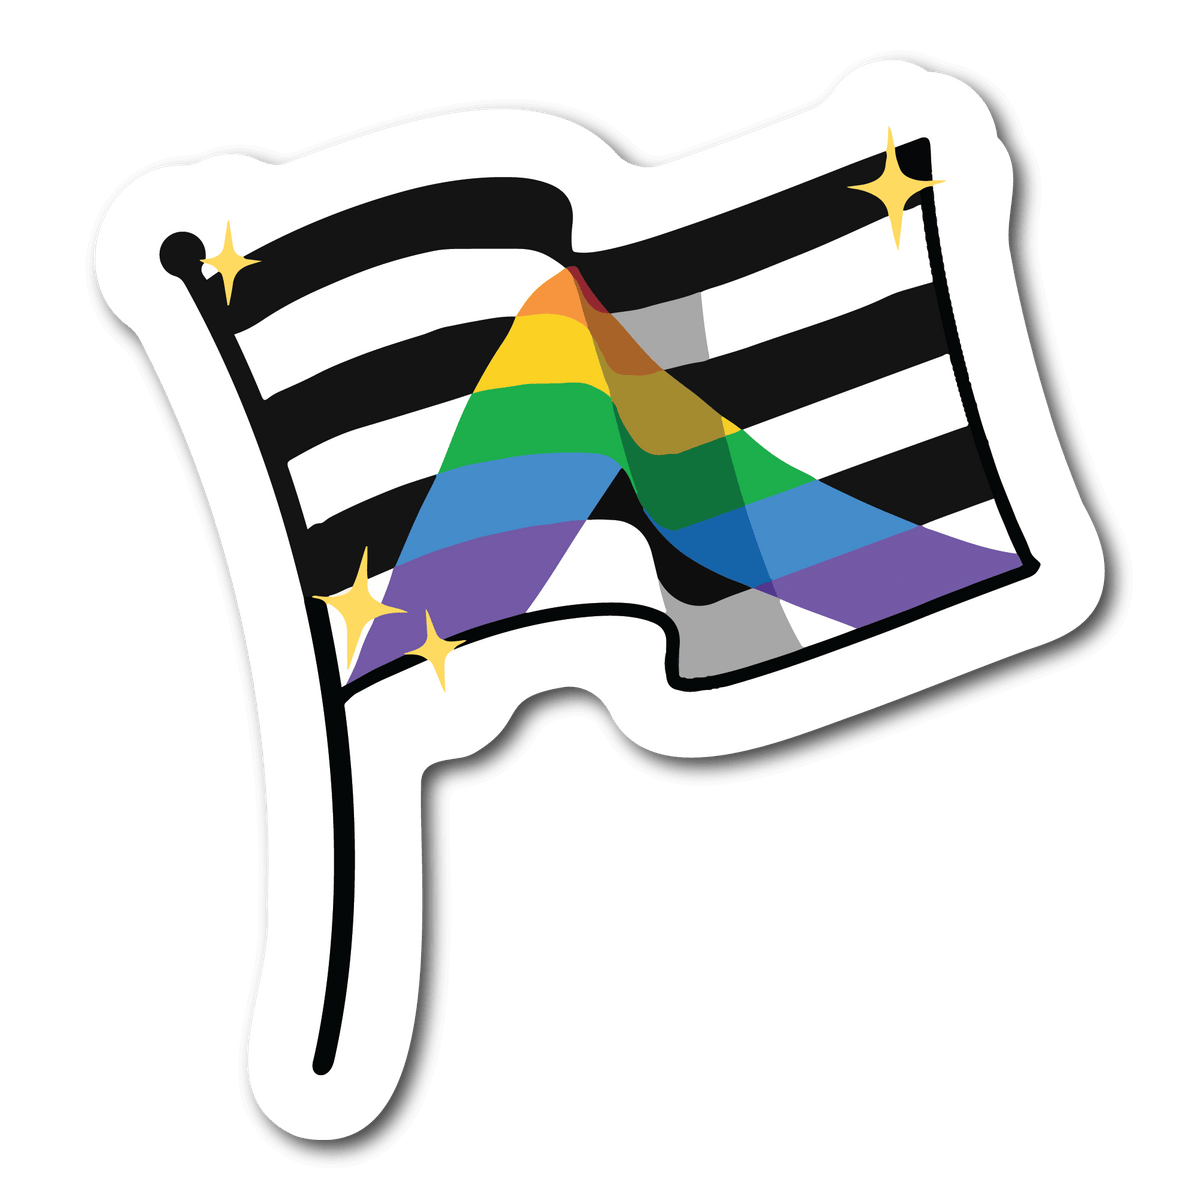 Small Ally Flag Waterproof Sticker for LGBTQ Name Tags